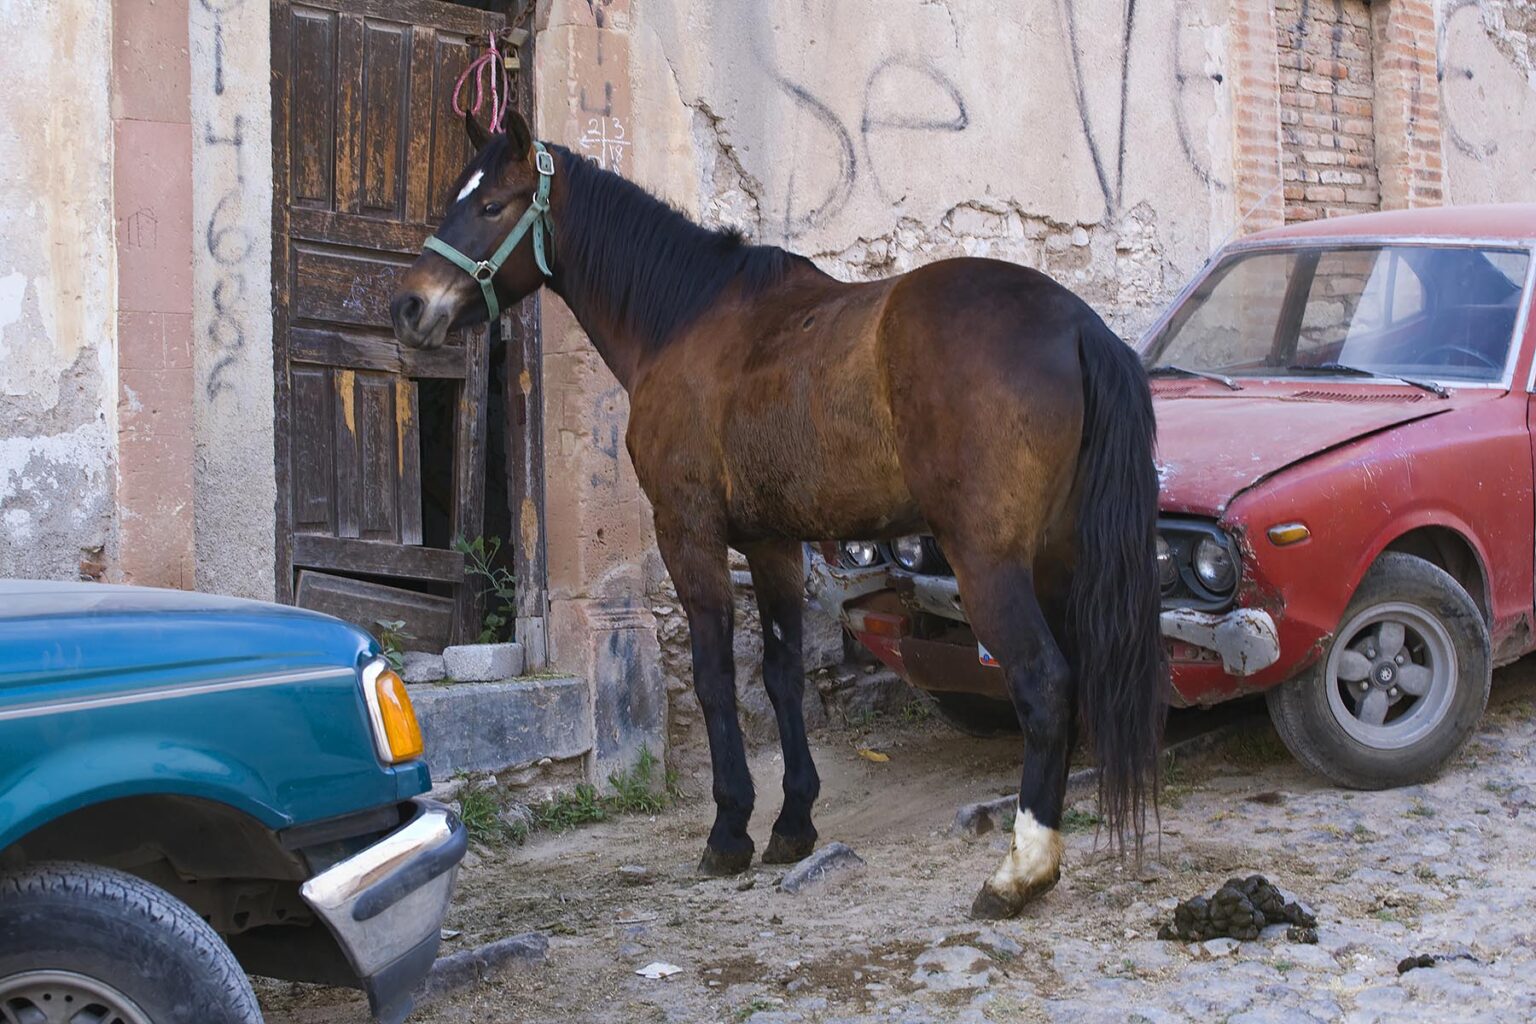 A tethered HORSE and CARS in the ghost town of MINERAL DE POZOS which is now a small artist colony and tourist destination - GUANAJUATO, MEXICO